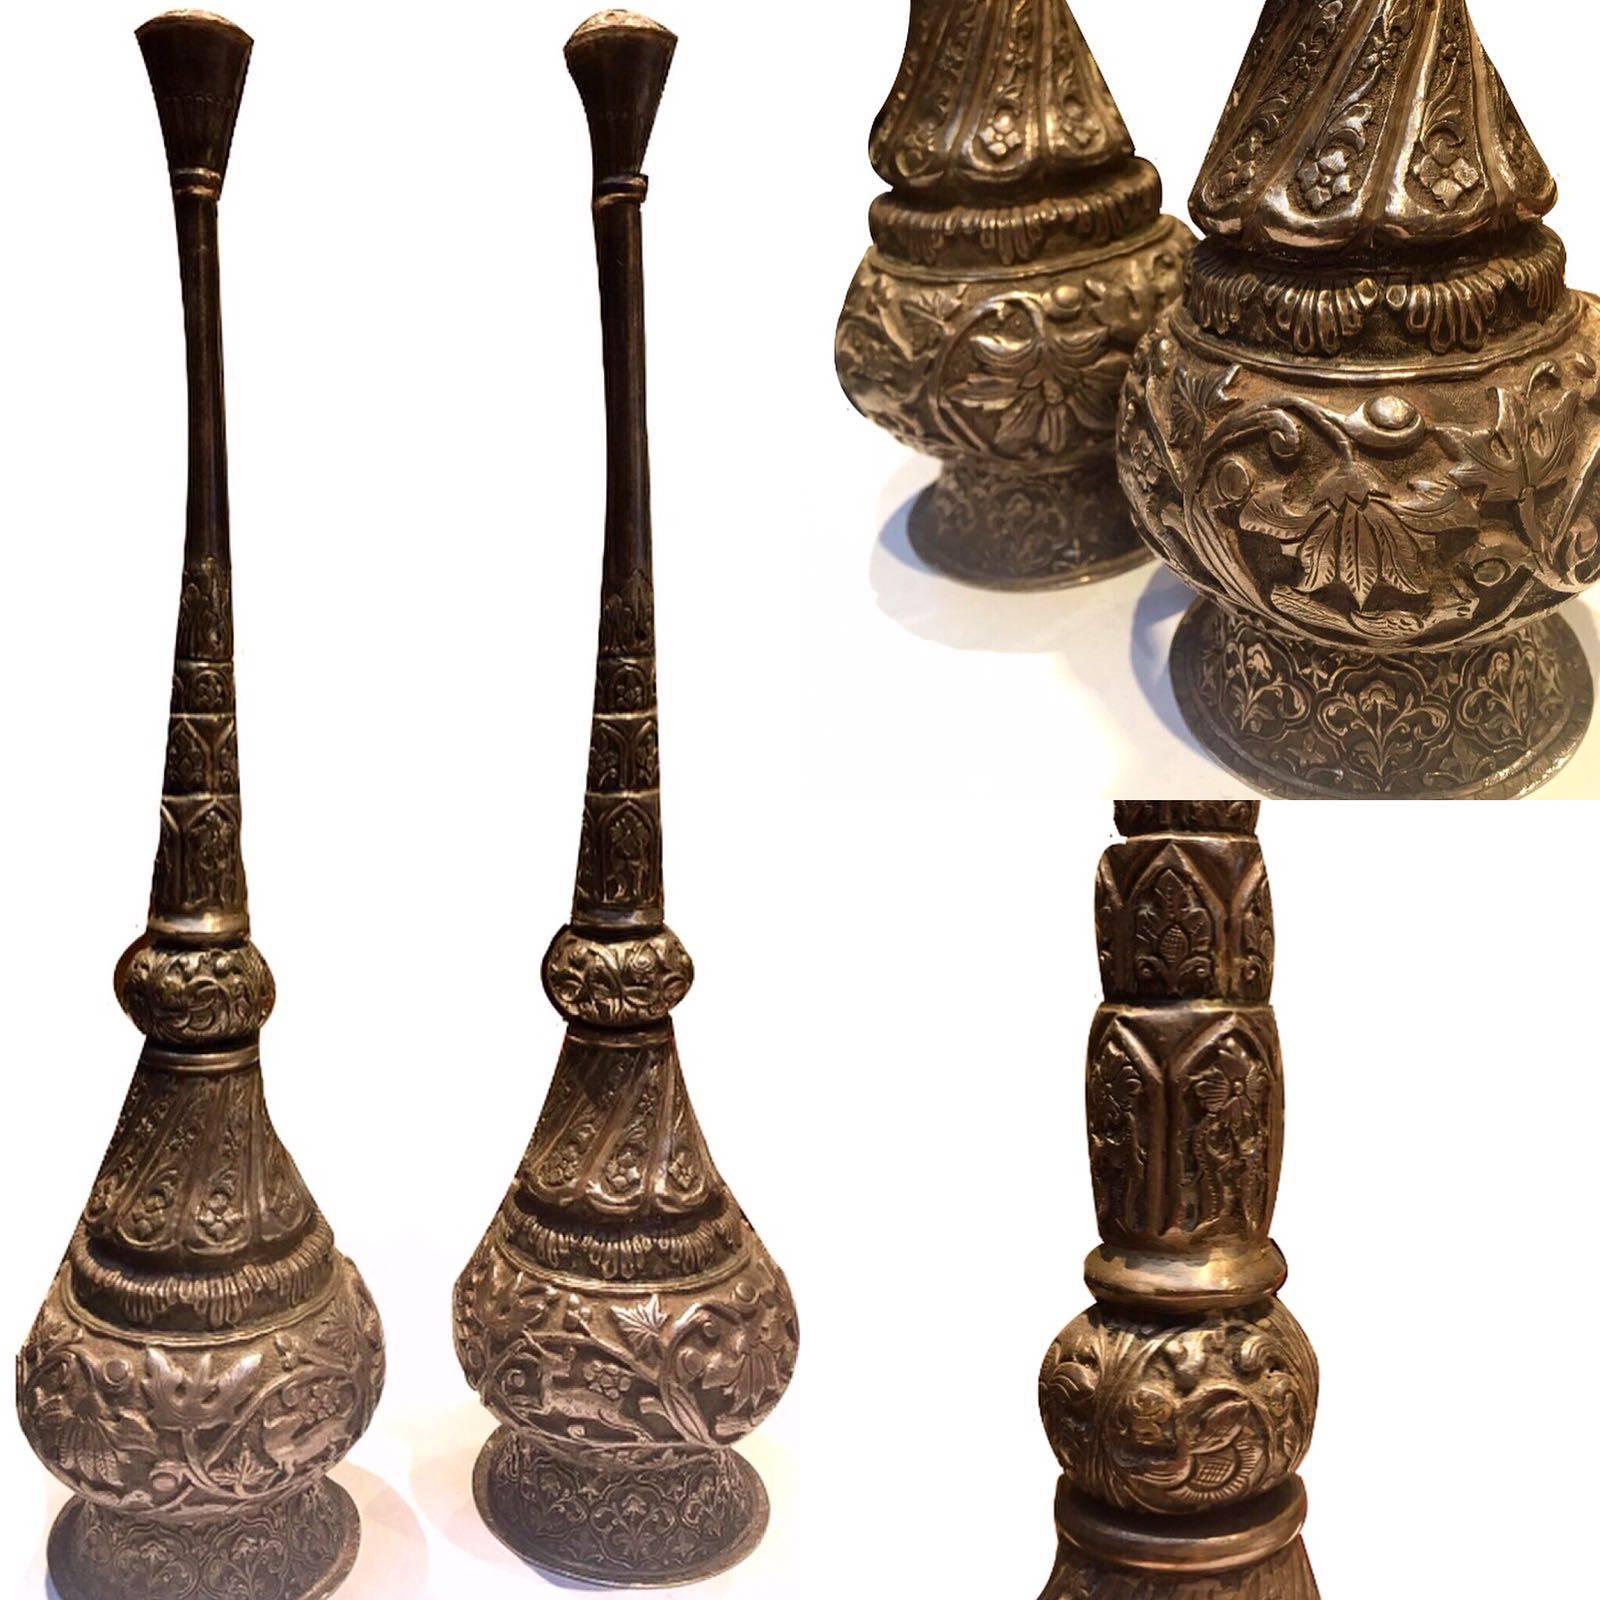 These 19th century, Indian silver rose water sprinklers. Used to spray rose water on the guests at the entrance, or for special occasions like marriage. 

Weight: 670 grams.